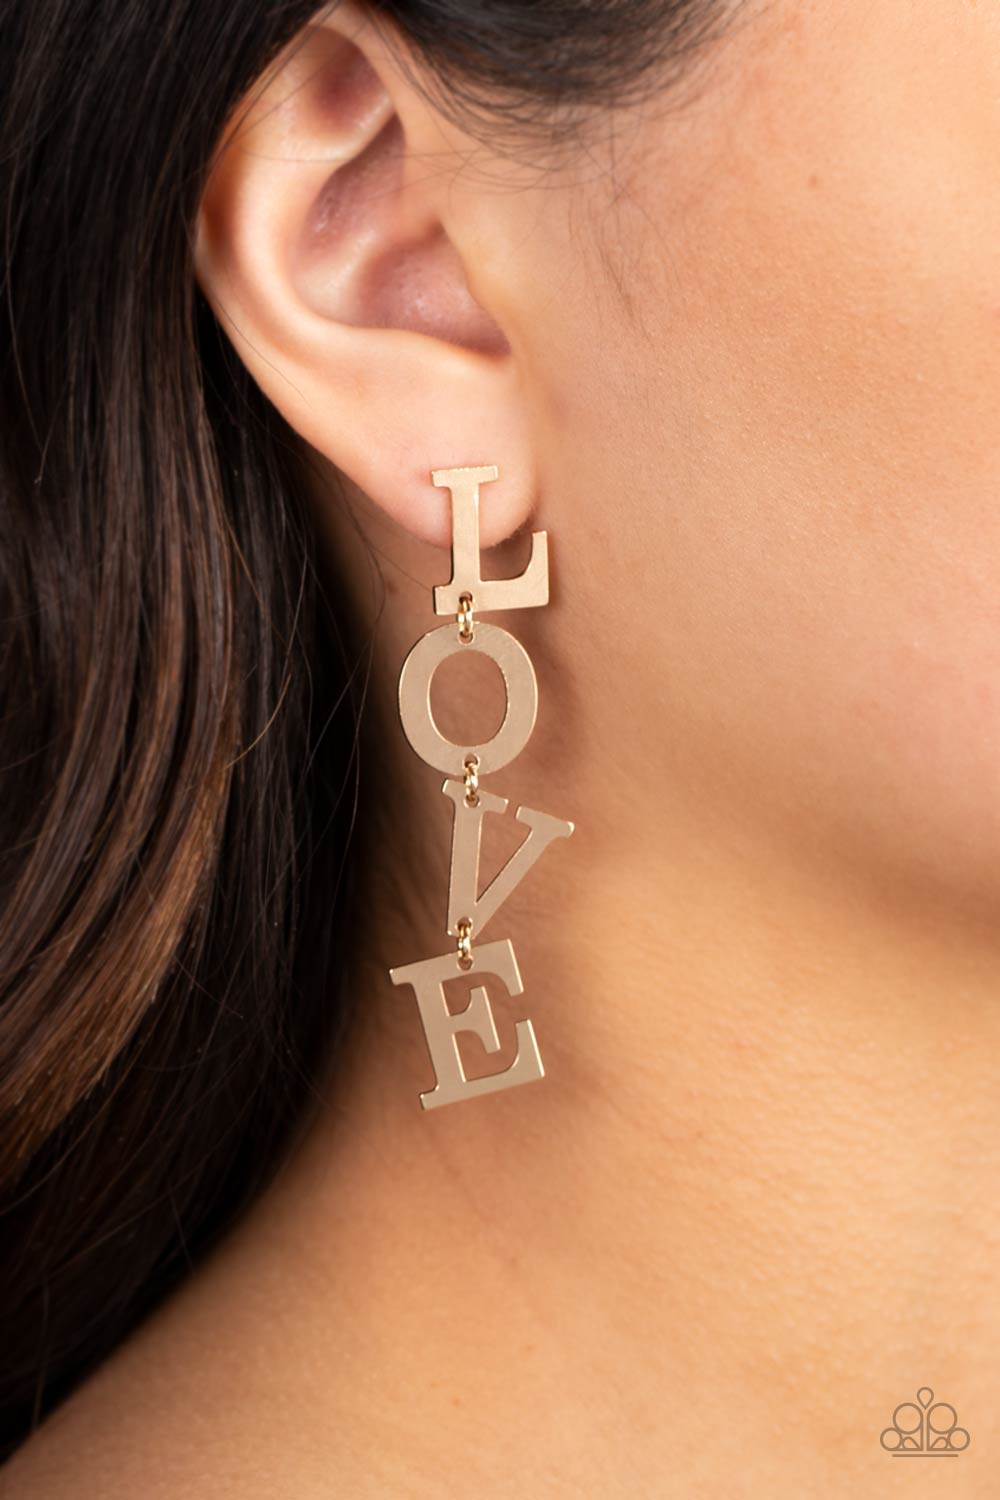 Paparazzi Accessories - L-O-V-E - Gold Earrings Gold letters with a lightly hammered sheen spell out the word "LOVE" as they vertically cascade down the ear in a flattering finish. Each of the letters are interconnected to one another giving the piece some whimsically playful movement. Earring attaches to a standard post fitting. Sold as one pair of post earrings.